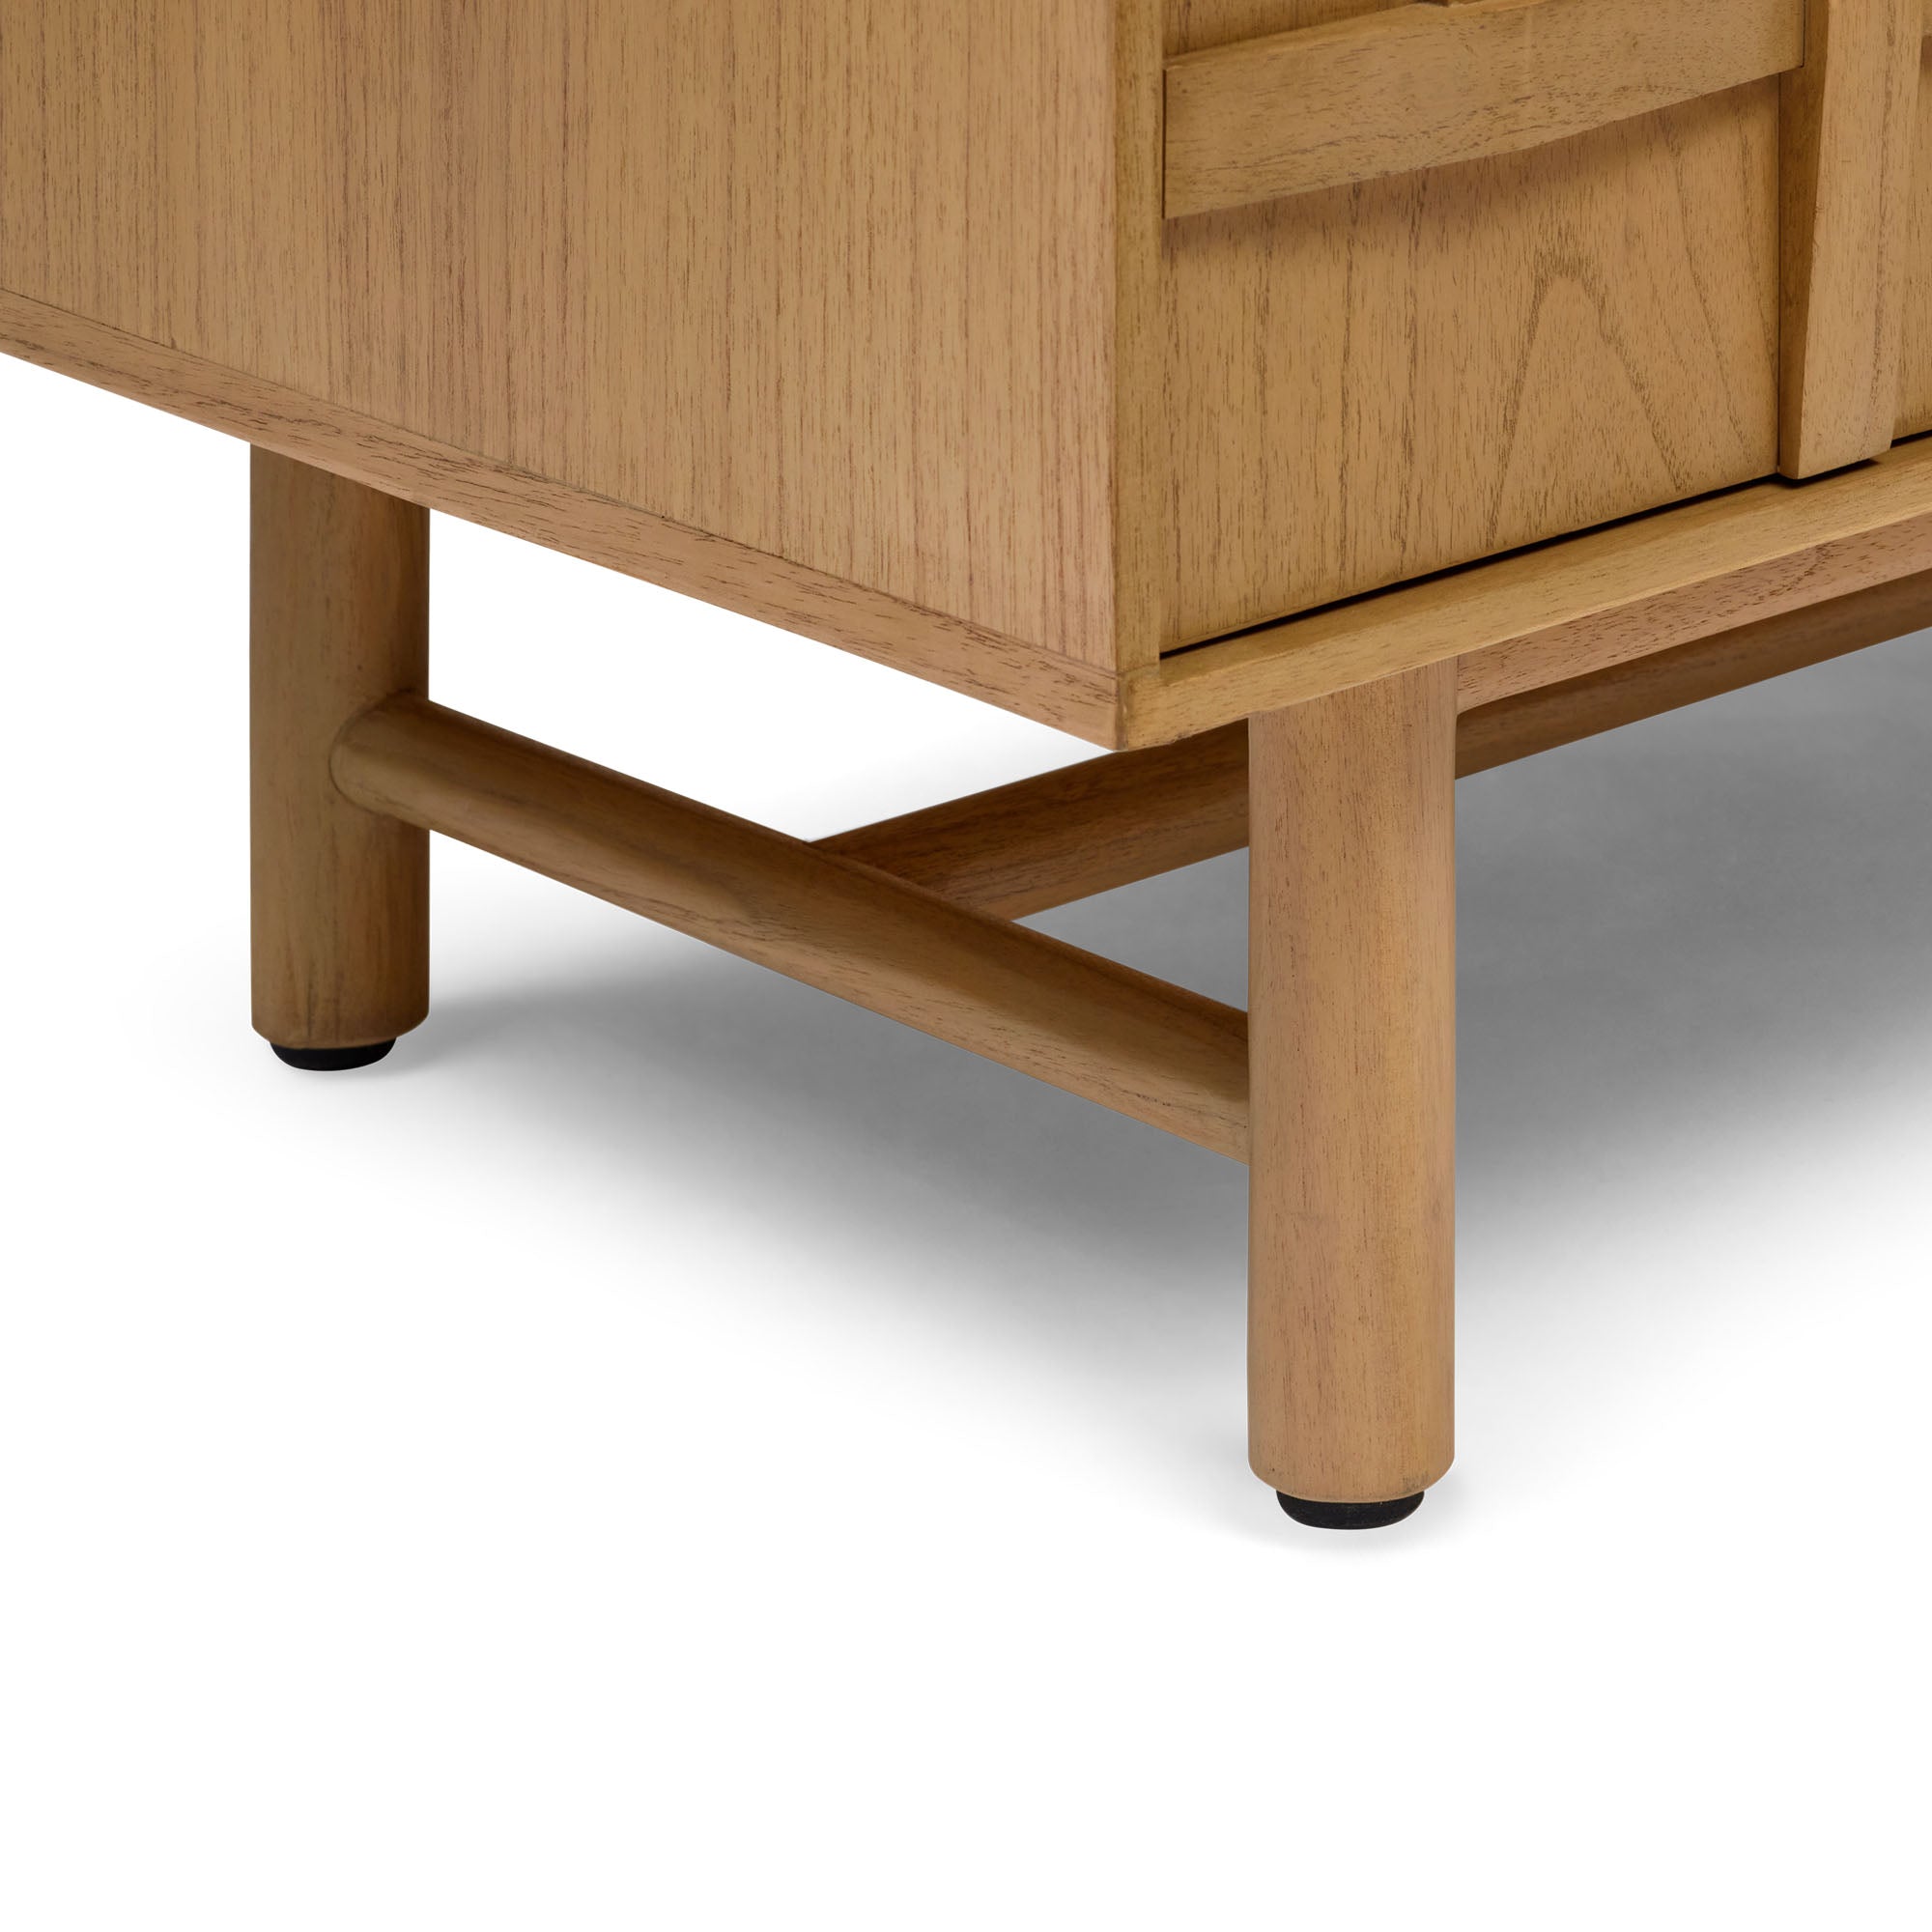 Ares Sideboard Natural